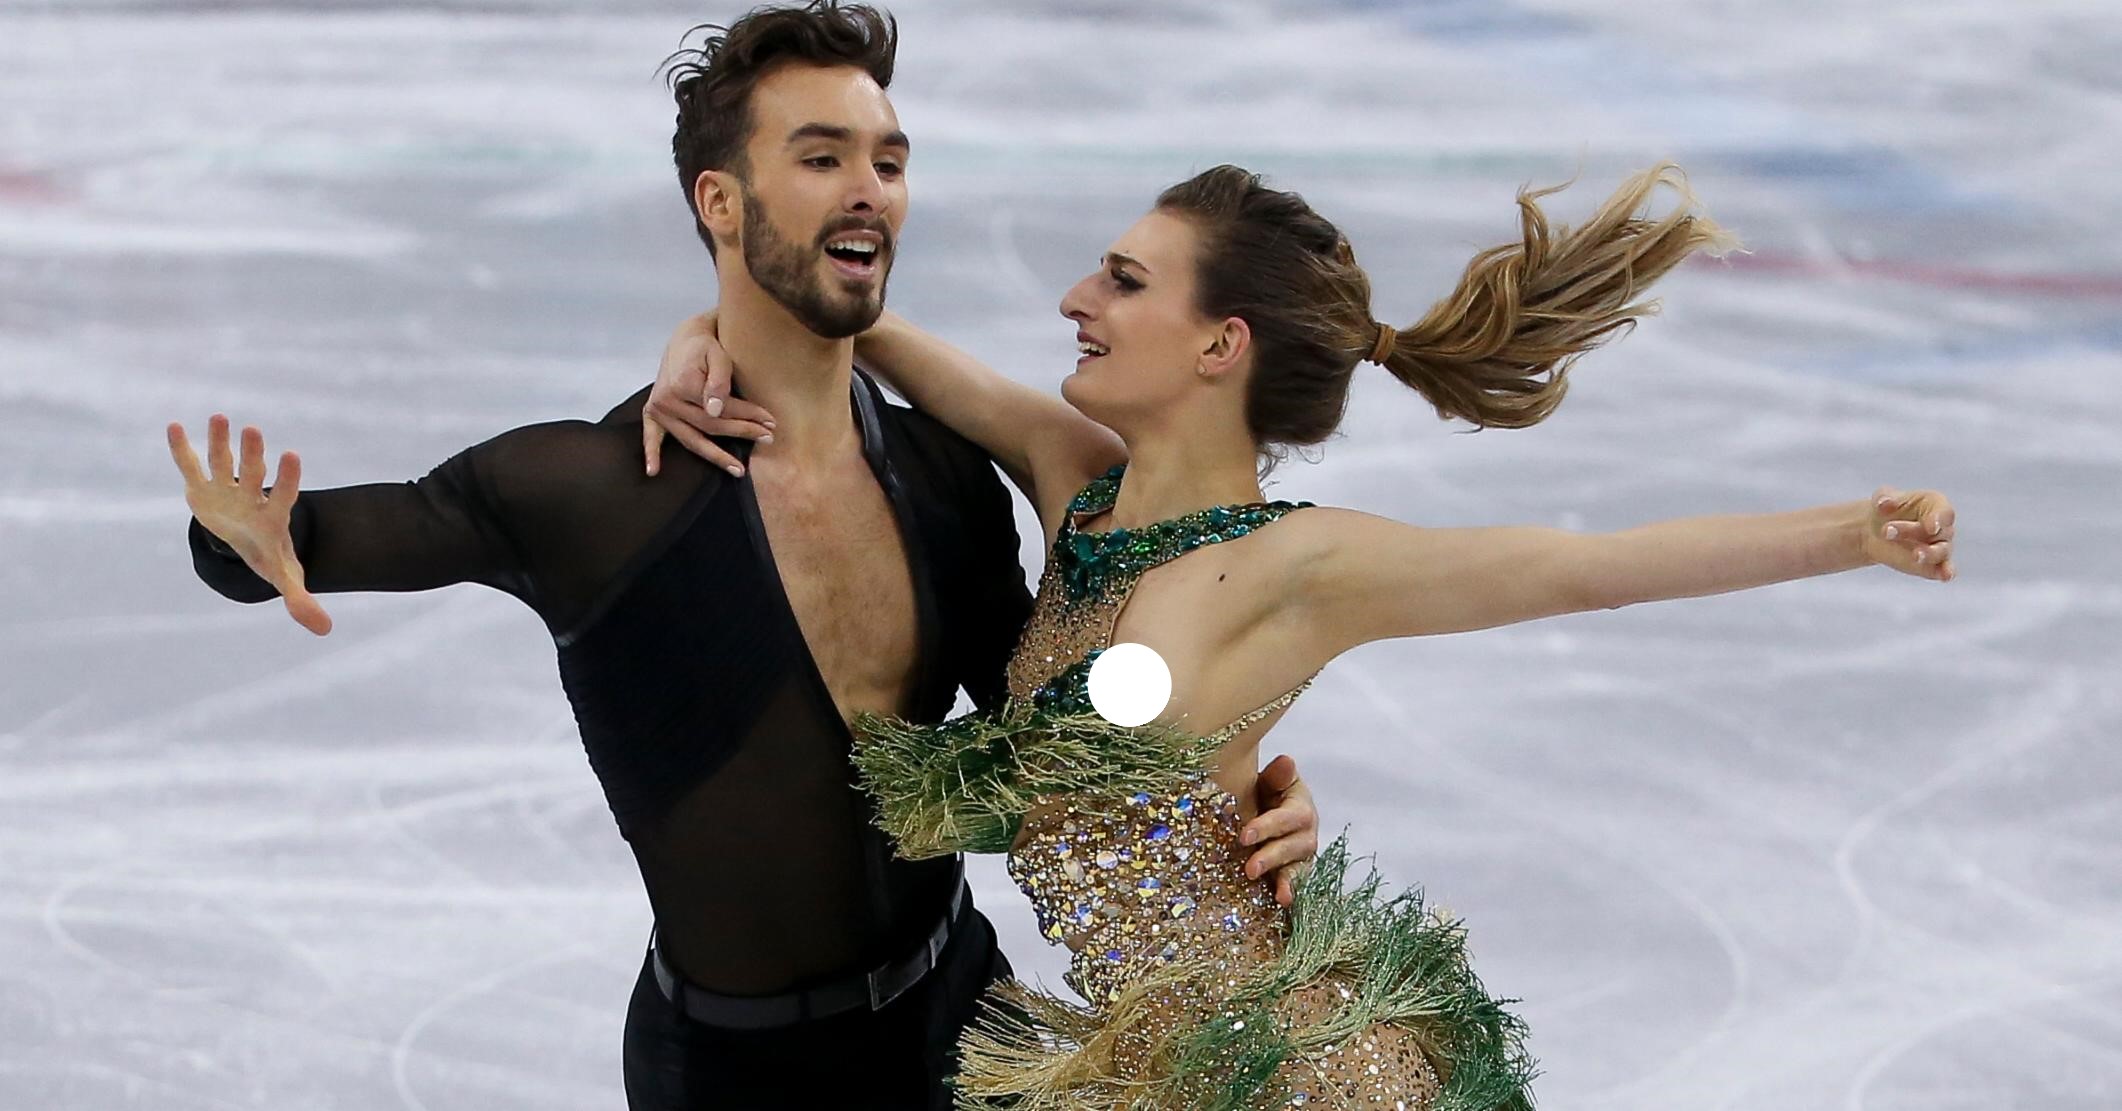 A French Figure Skater Had an Unfortunate Nip Slip During Her Olympic